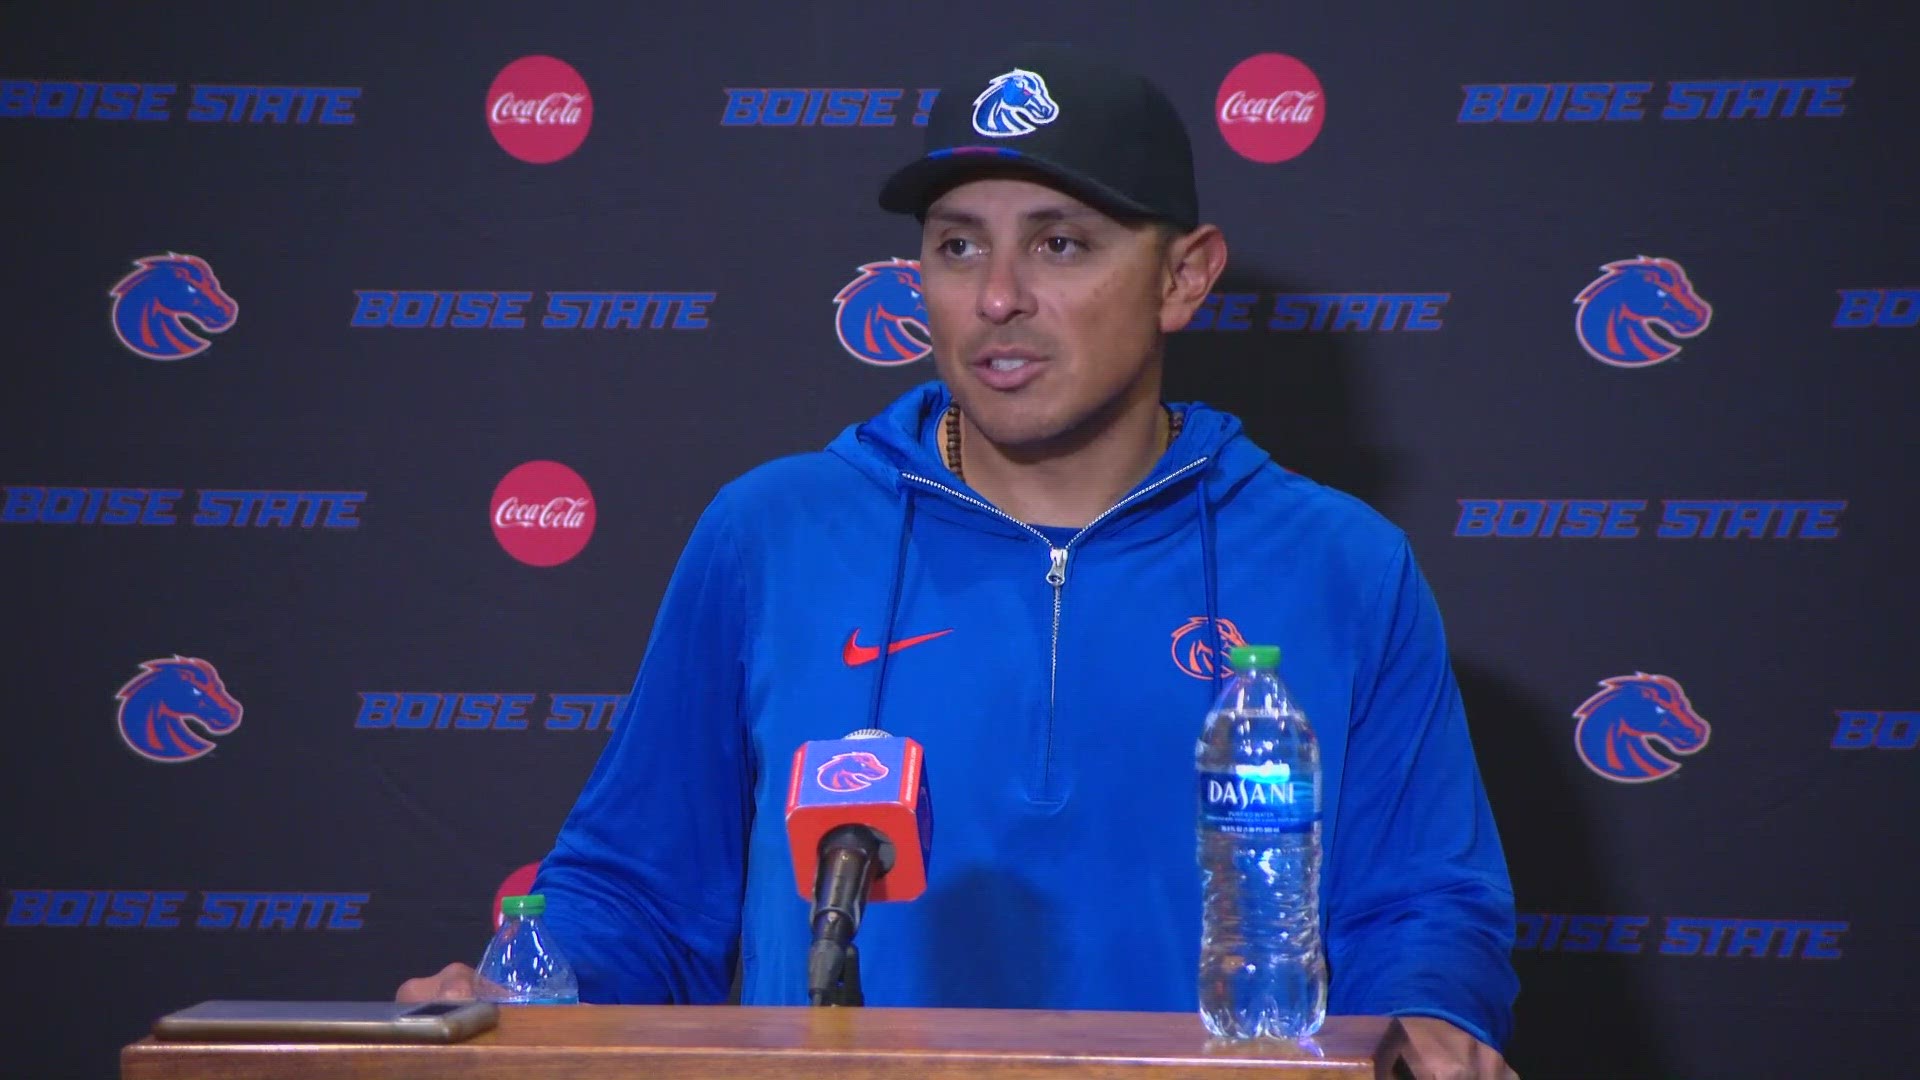 Head coach Andy Avalos meets with the media after Boise State captured its third 20-point comeback win as an FBS program Saturday night.